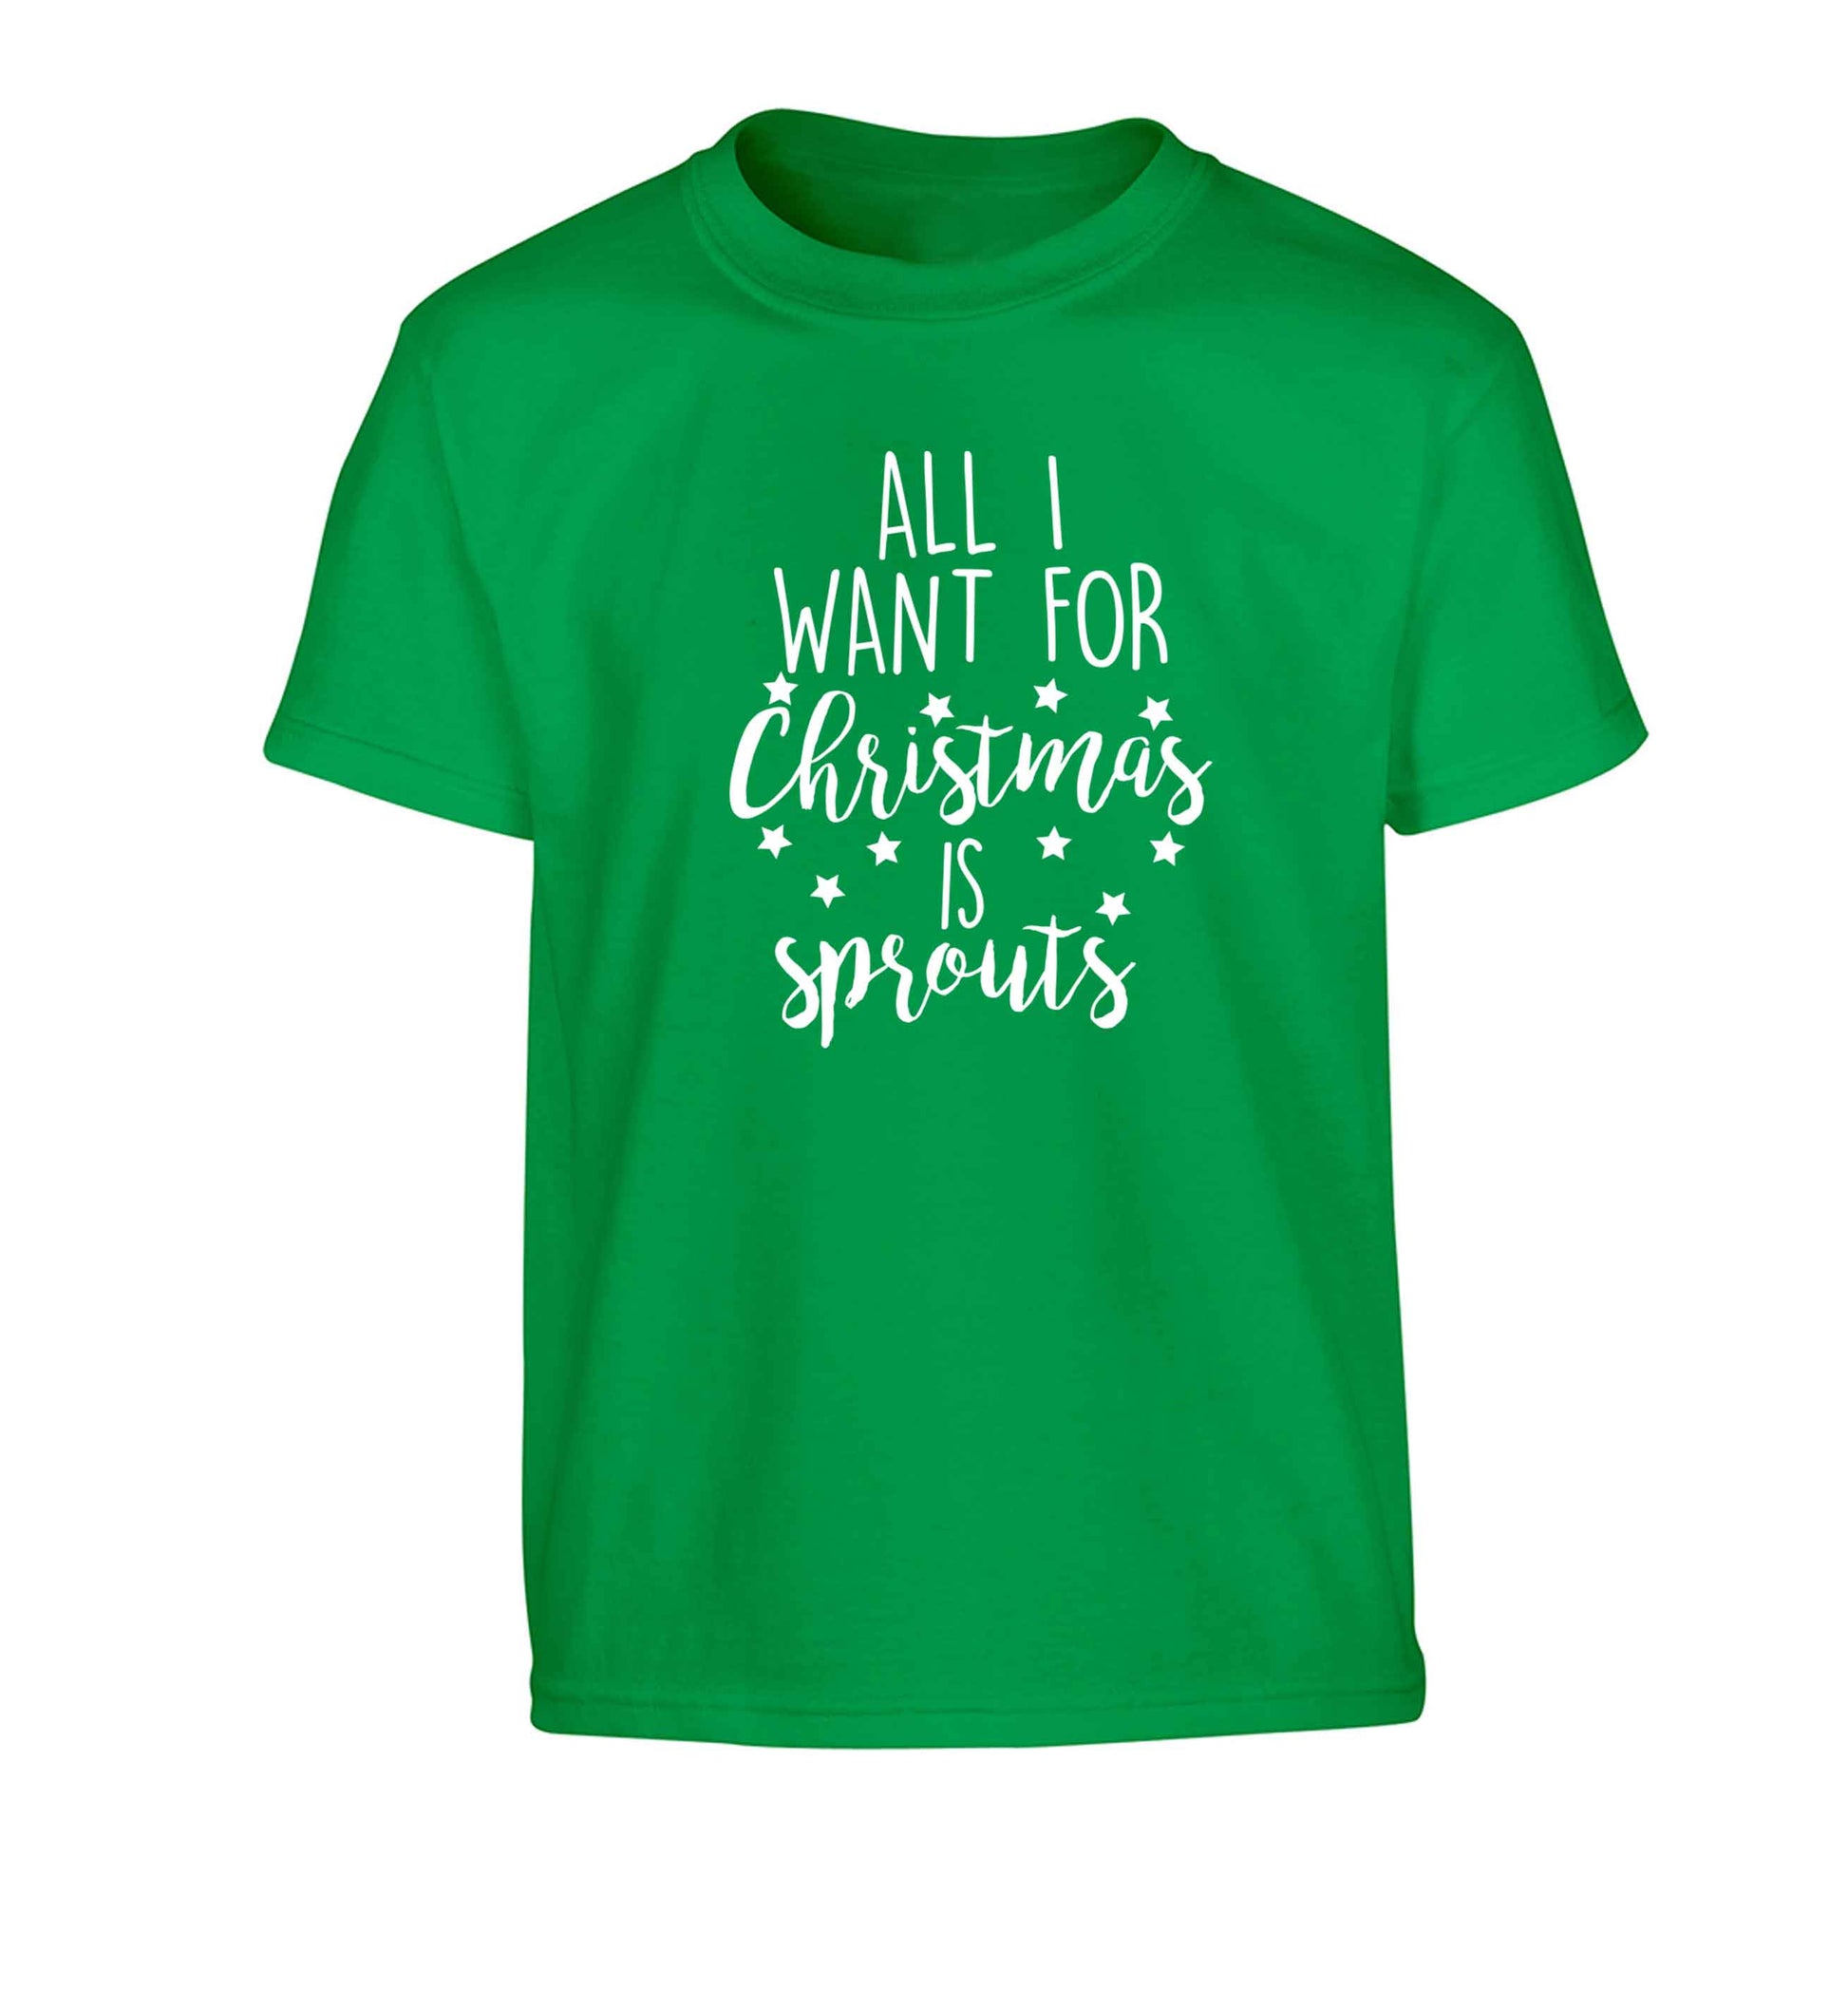 All I want for Christmas is sprouts Children's green Tshirt 12-13 Years